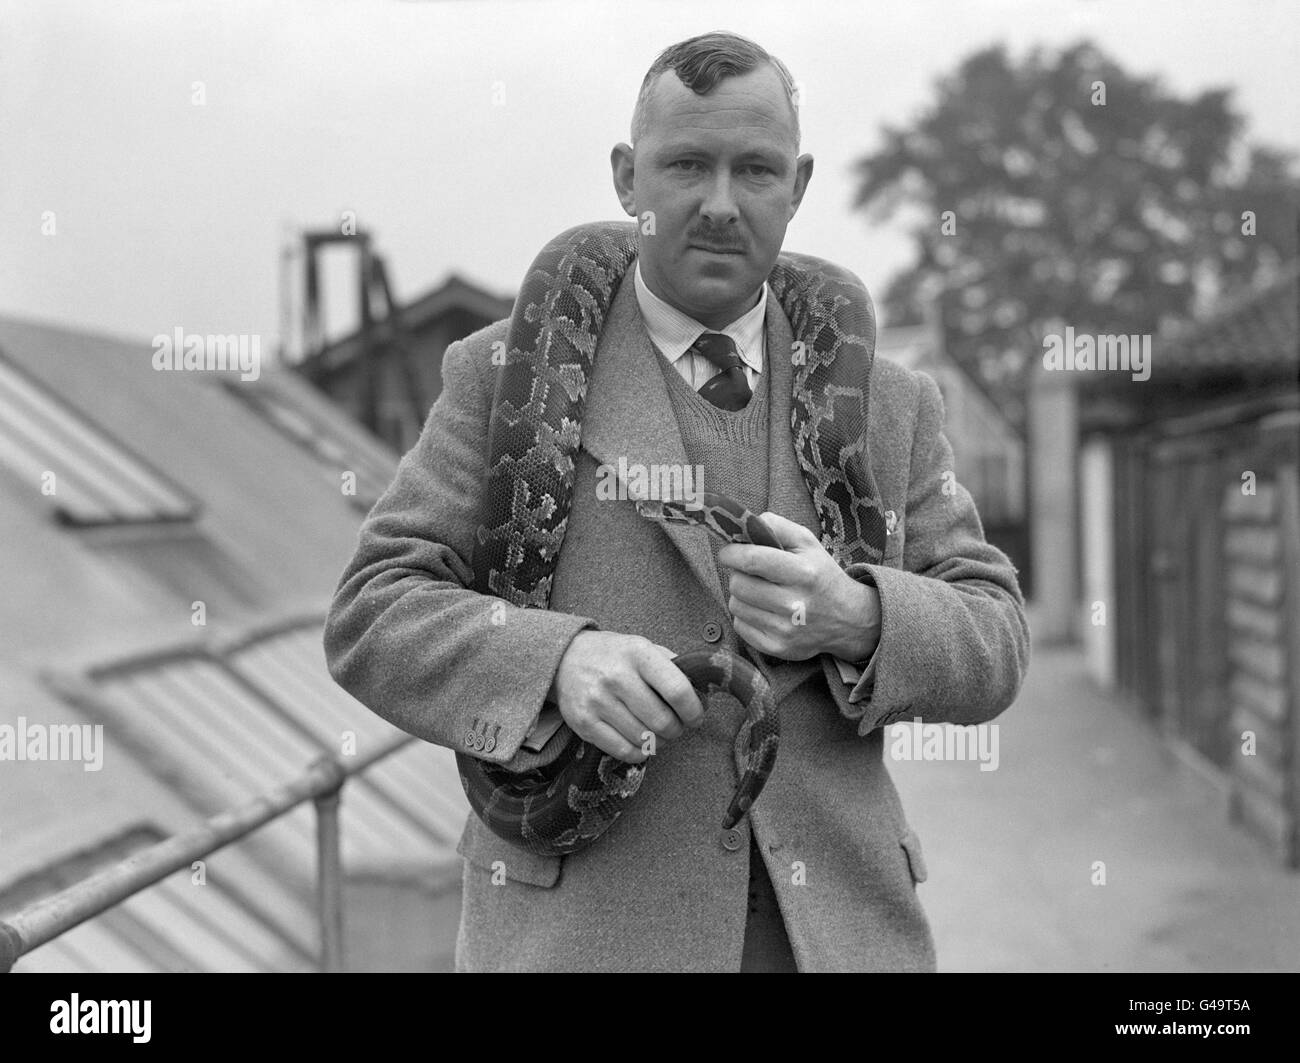 Mr George S. Cansdale, soon to be superintendent of London Zoo, stands with an Indian Python around his shoulders Stock Photo